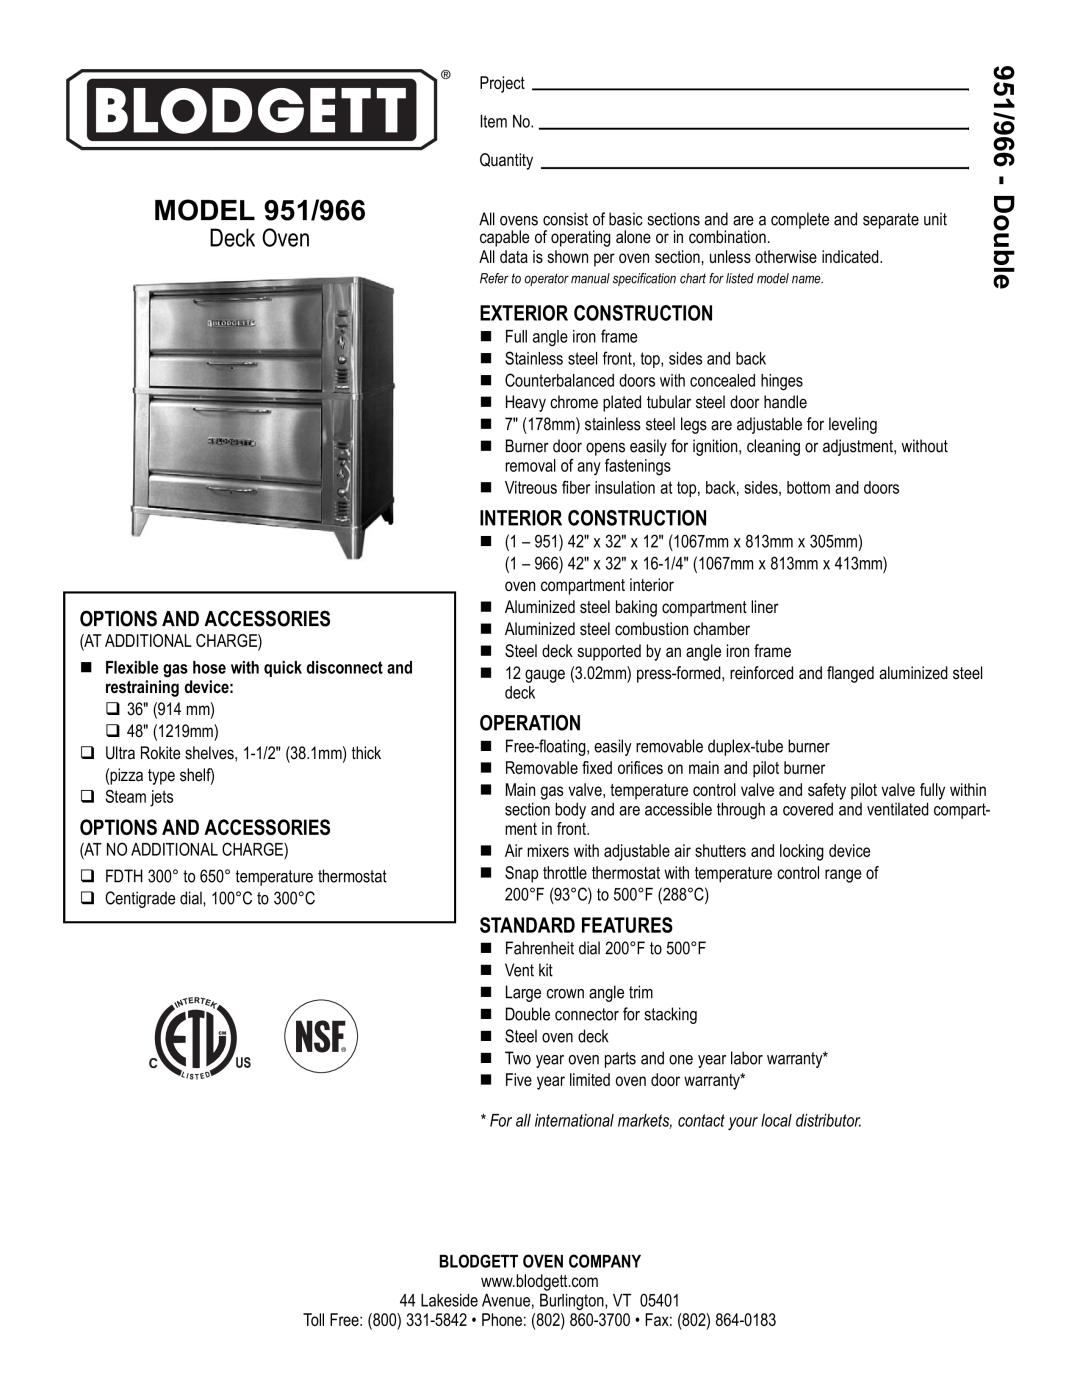 Blodgett warranty MODEL 951/966, Options And Accessories, Exterior Construction, Interior Construction, Operation 